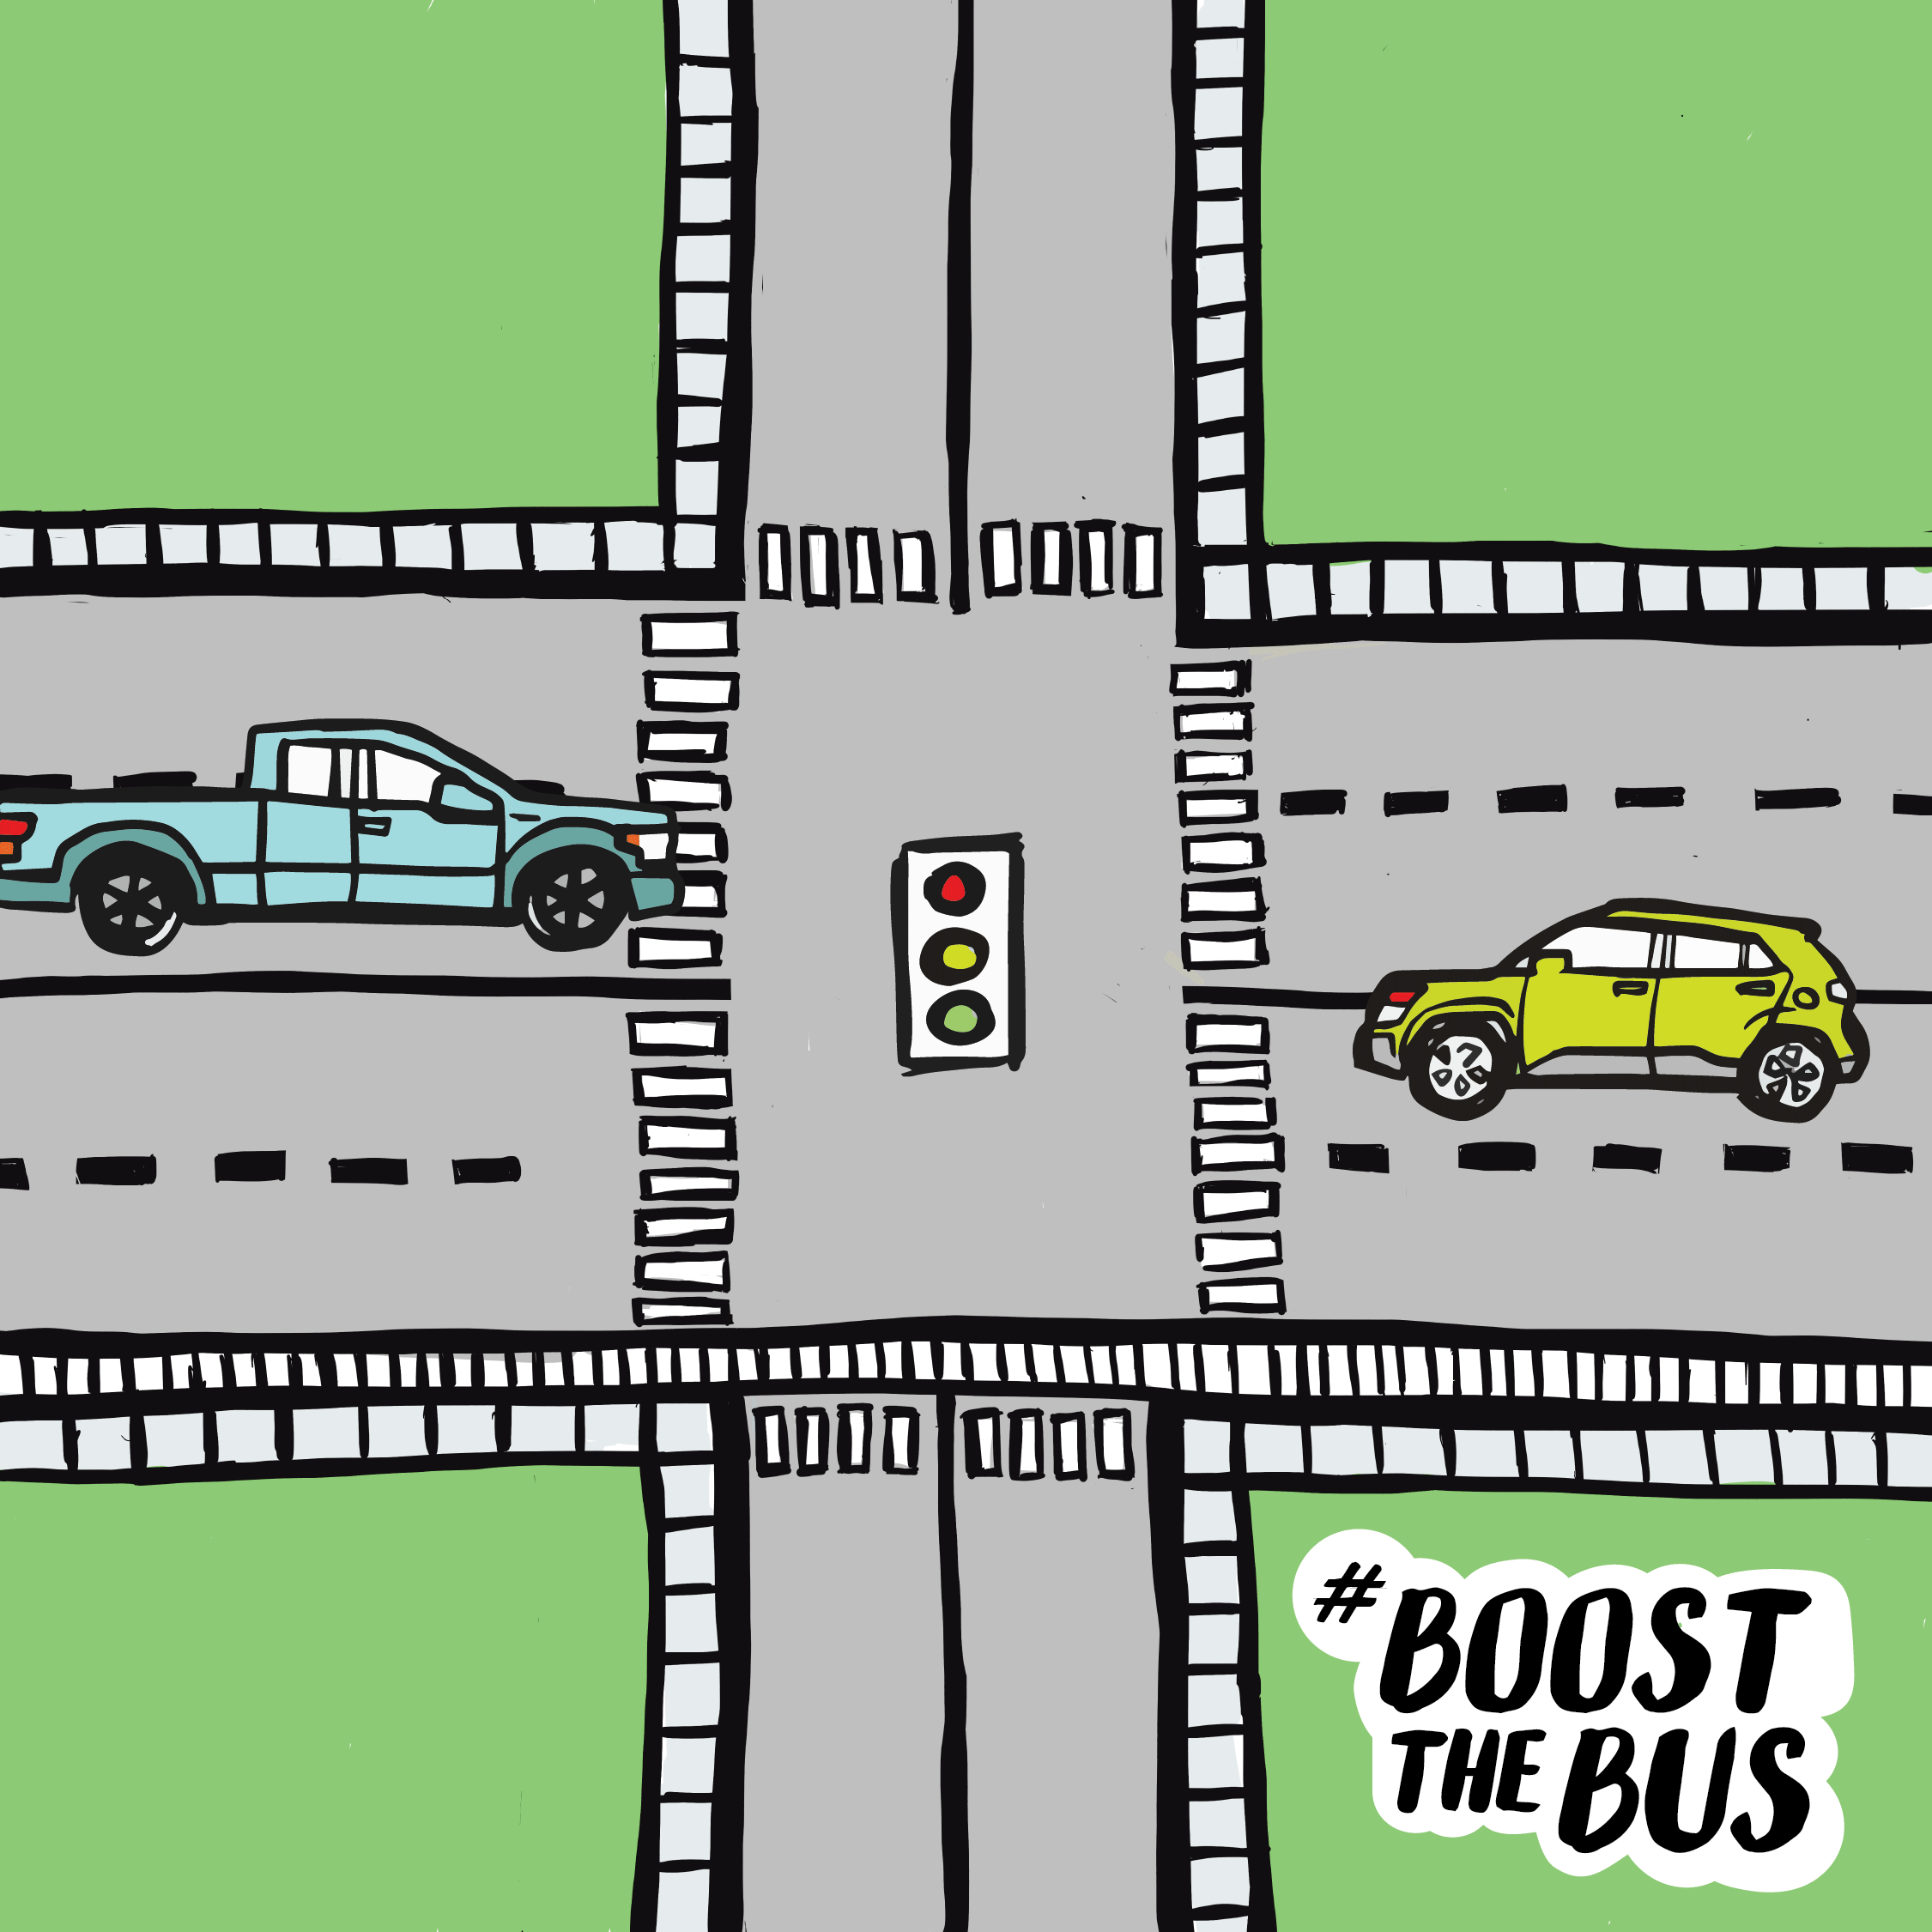 boost-the-bus-campaign_give-buses-green-light.gif